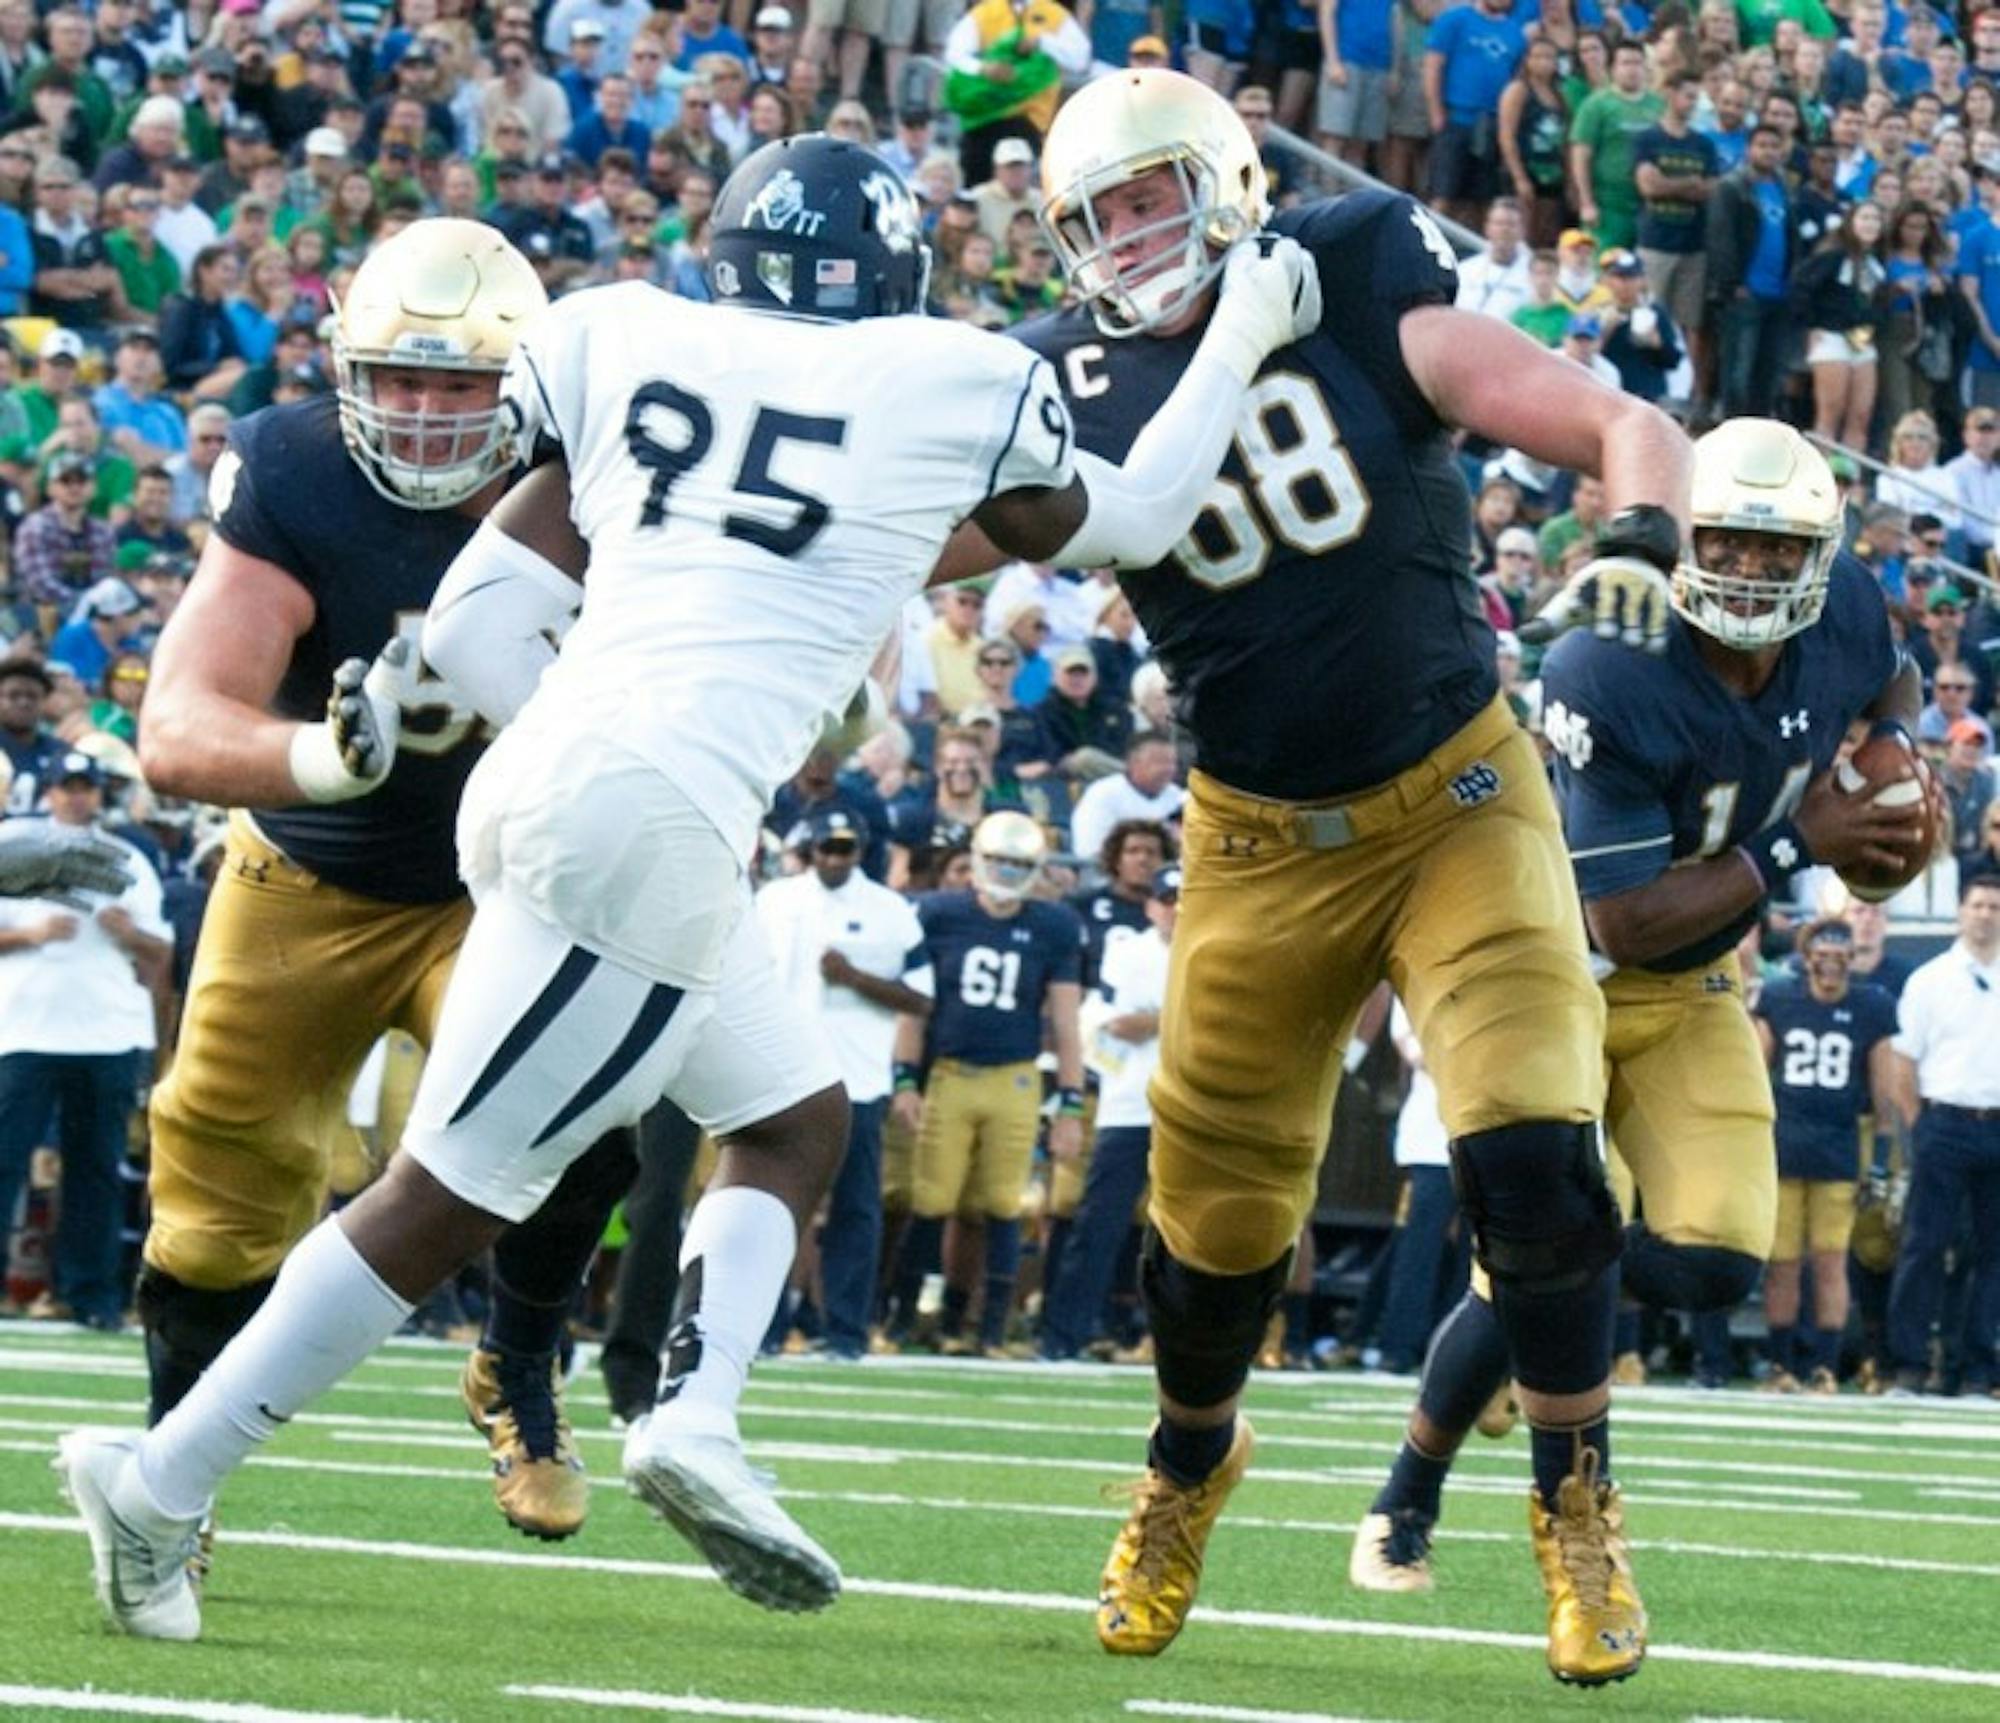 Irish senior offensive lineman and team captain Mike McGlinchey leads the way on senior running back Tarean Folston’s touchdown run late in the second quarter during Notre Dame’s victory over Nevada.